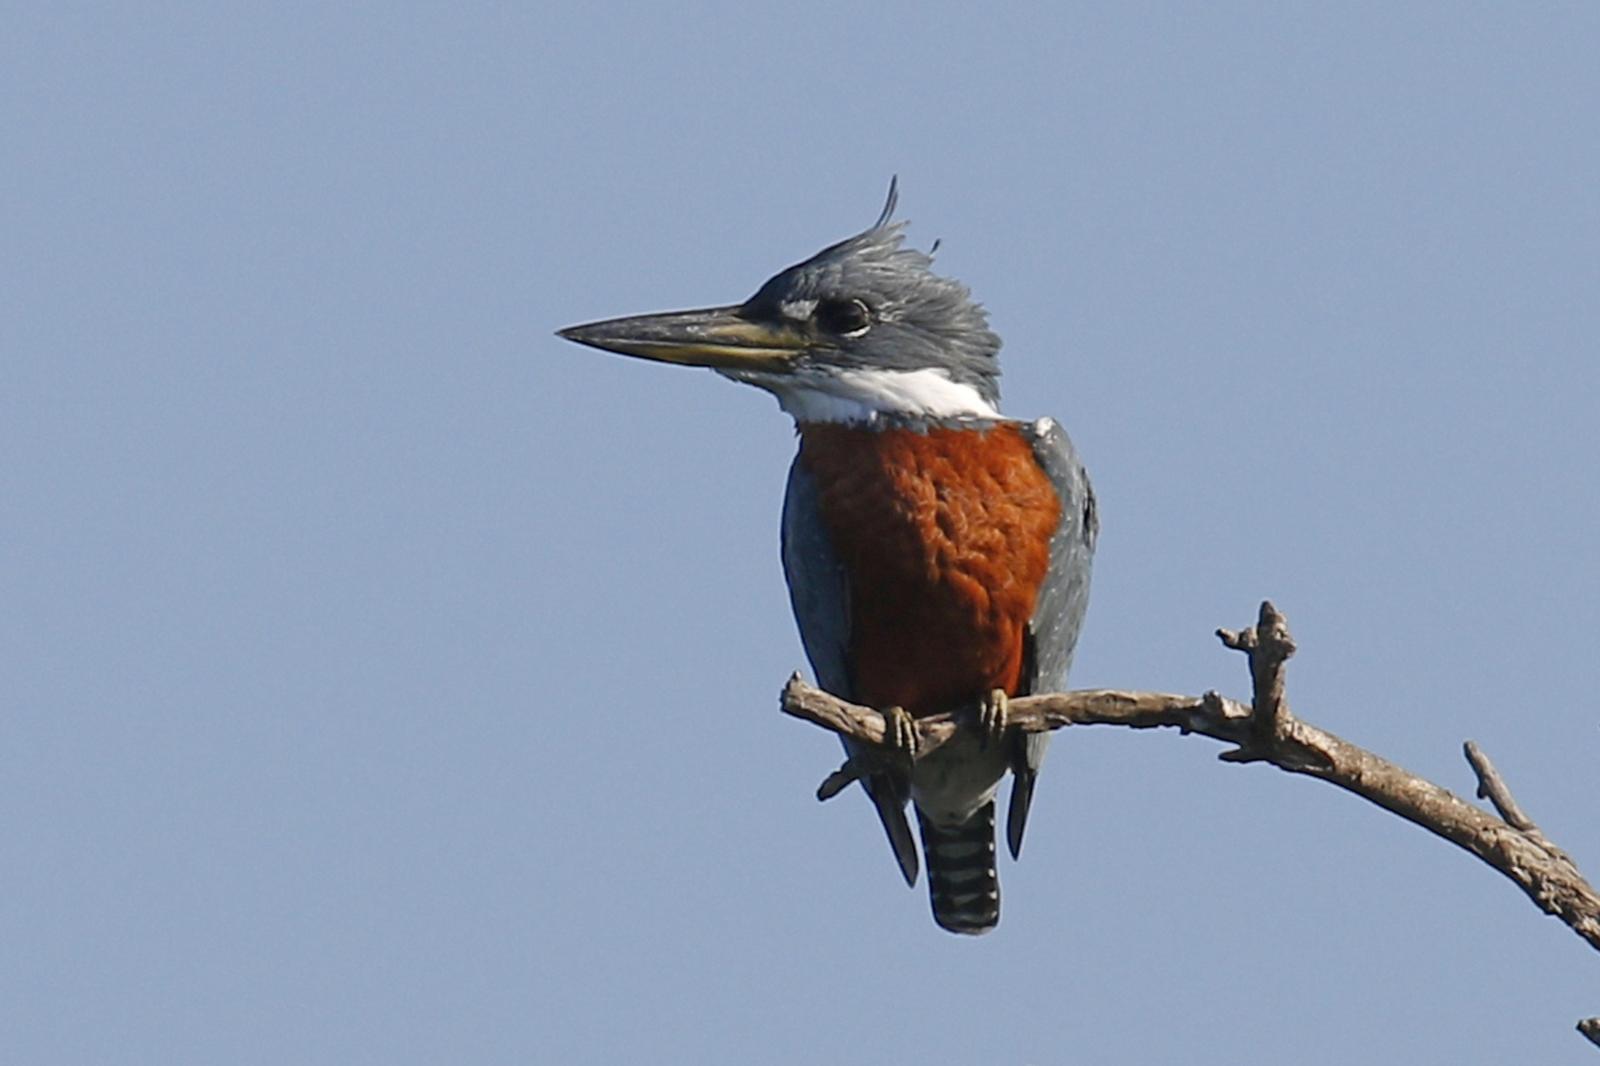 Ringed Kingfisher Photo by Donna Pomeroy